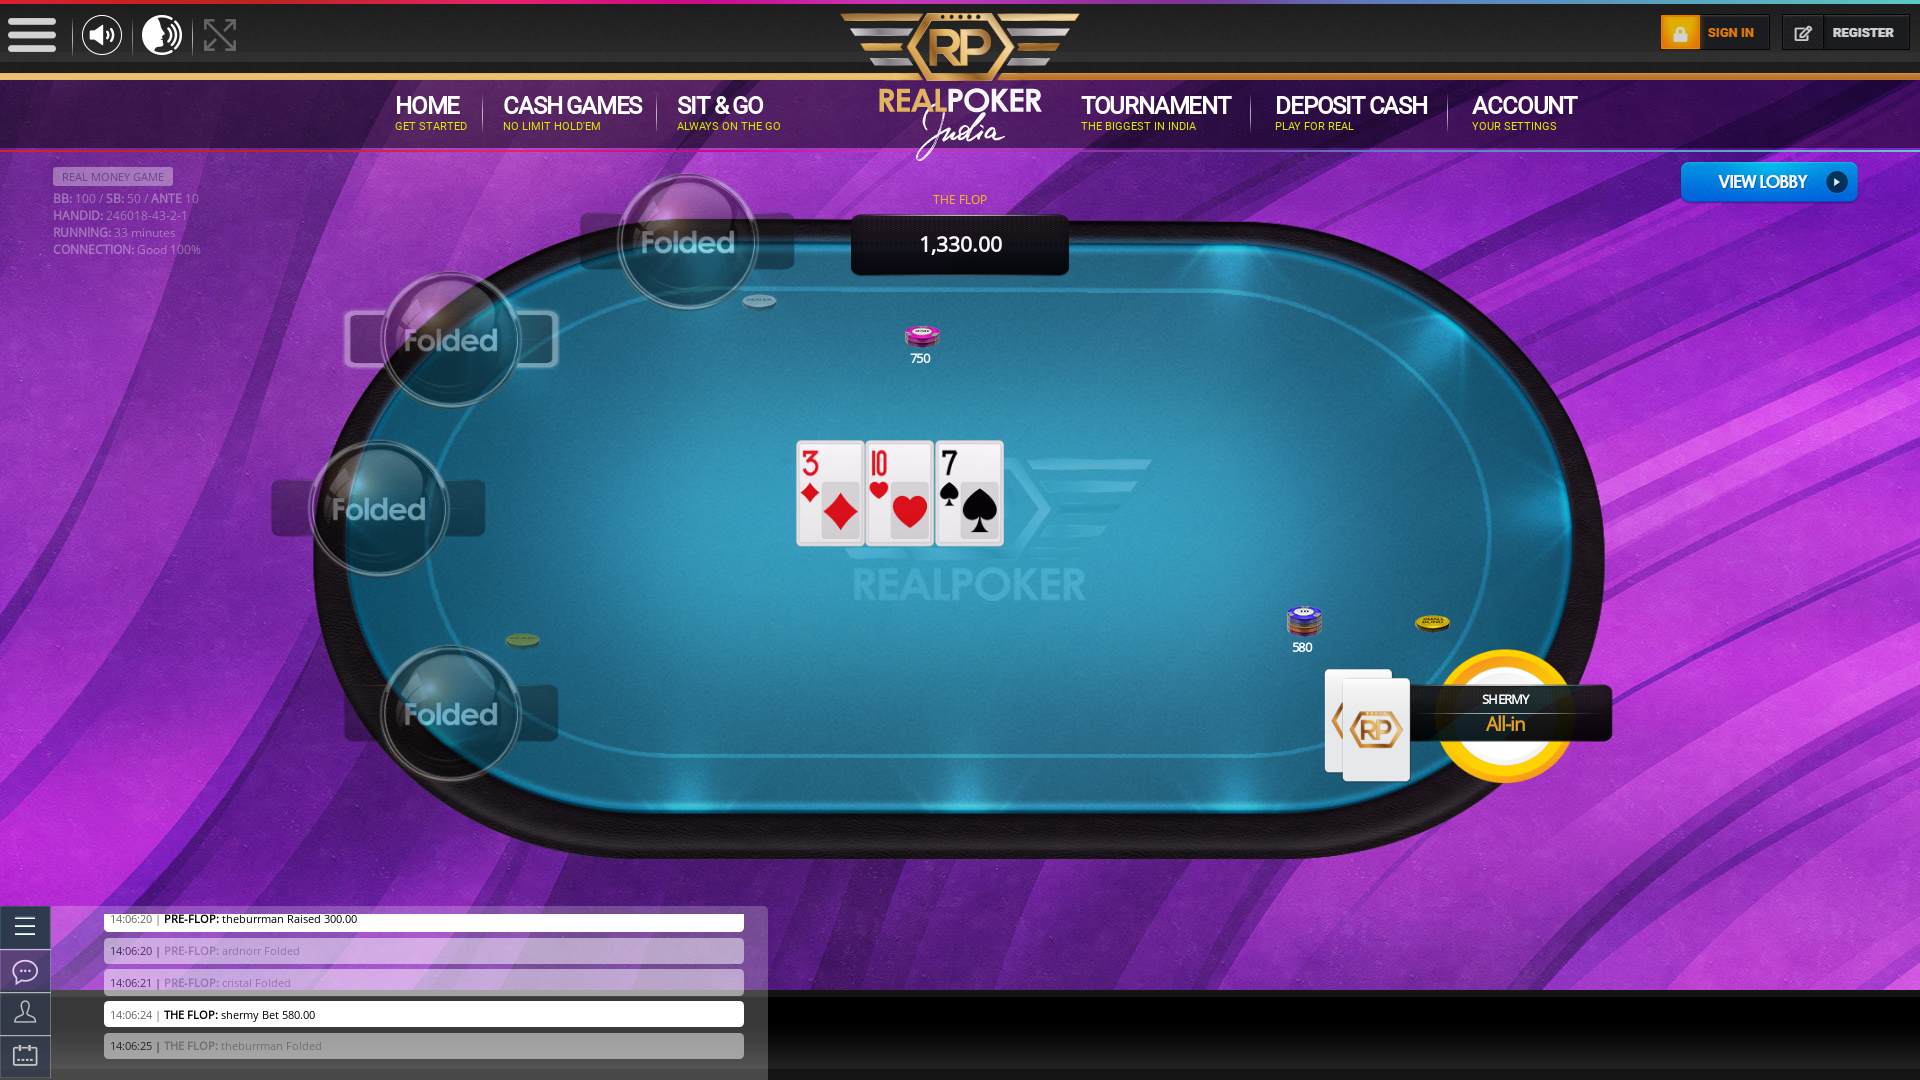 10 player poker in the 32nd minute